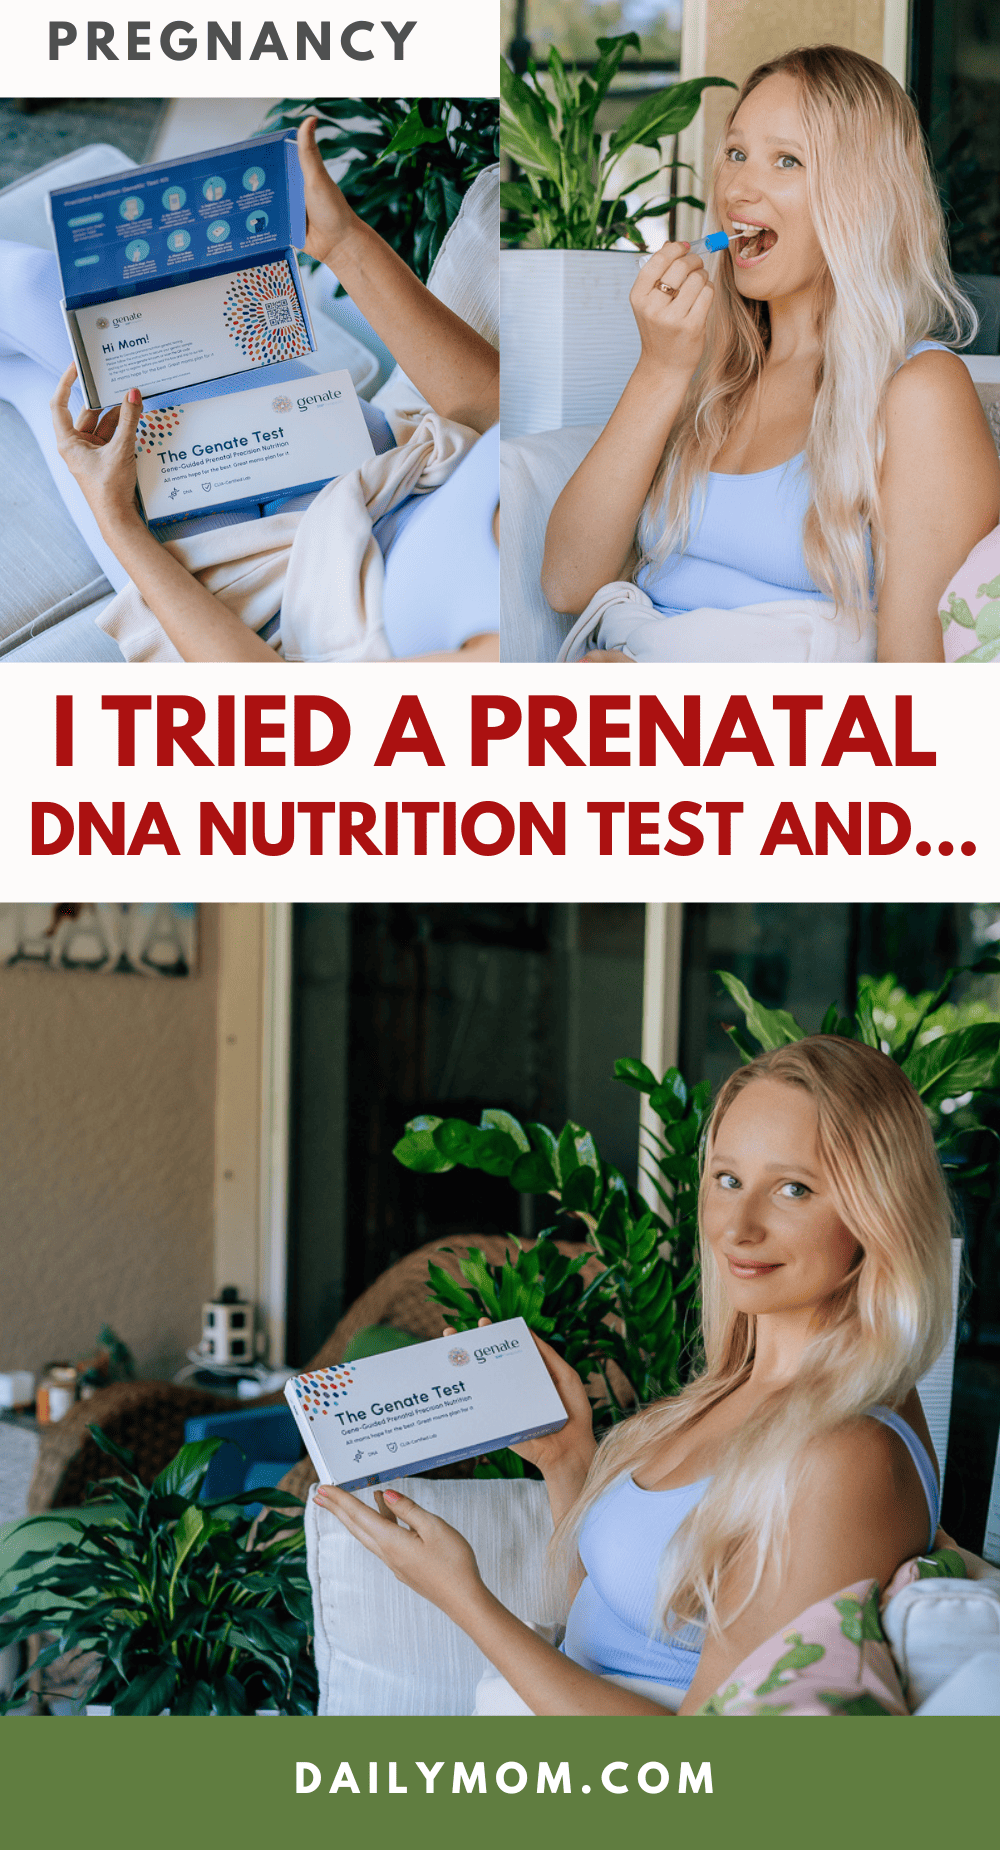 I tried Prenatal DNA Nutrition test by Genate and here is what I would do differently with my prenatal nutrition plan for my next pregnancy 22 Daily Mom, Magazine for Families